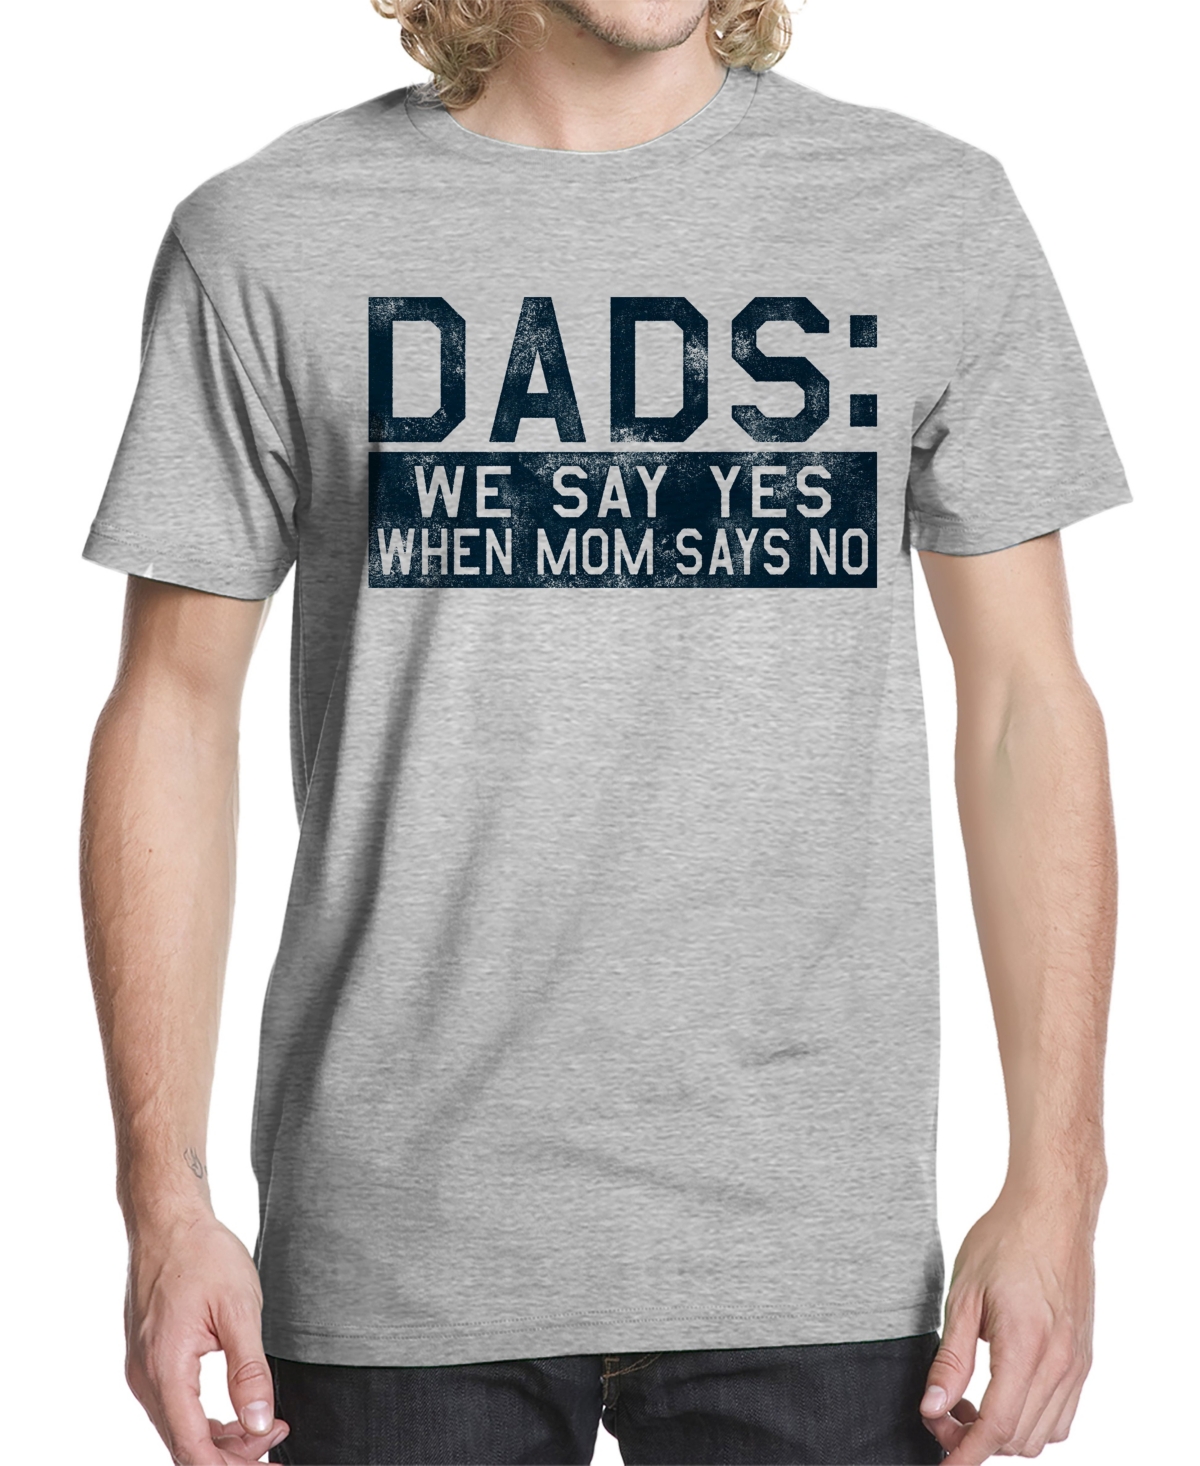 Men's Dads Say Yes Graphic T-shirt - Sport Gray